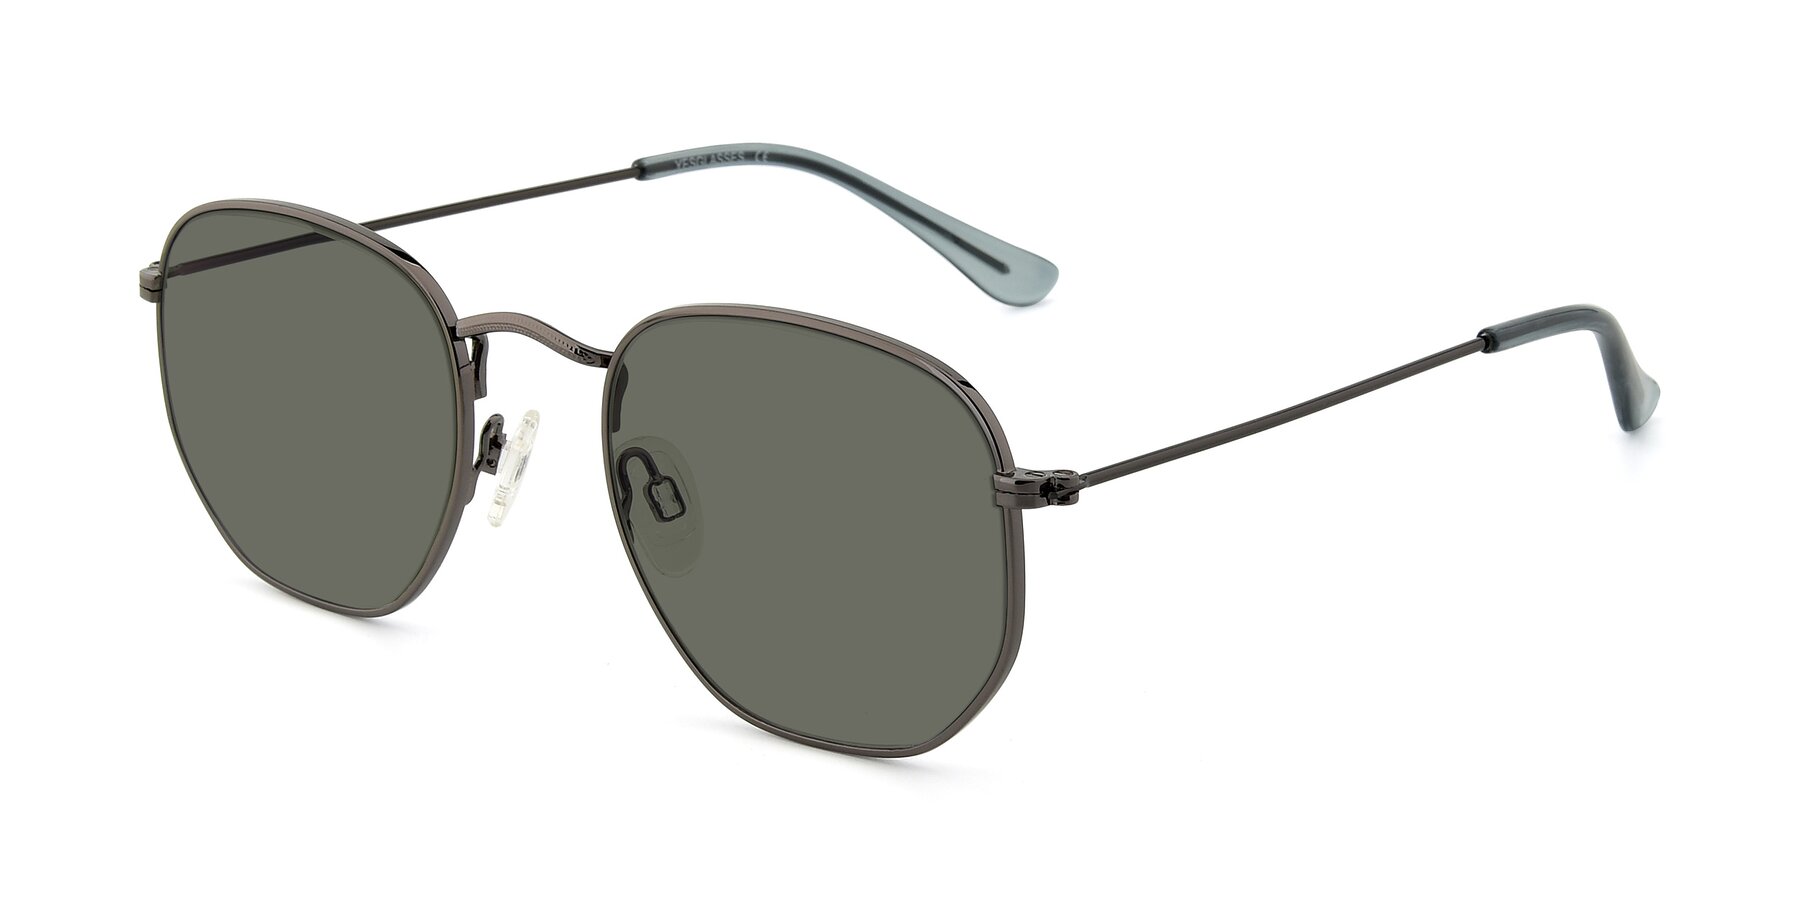 Angle of SSR1944 in Grey with Gray Polarized Lenses